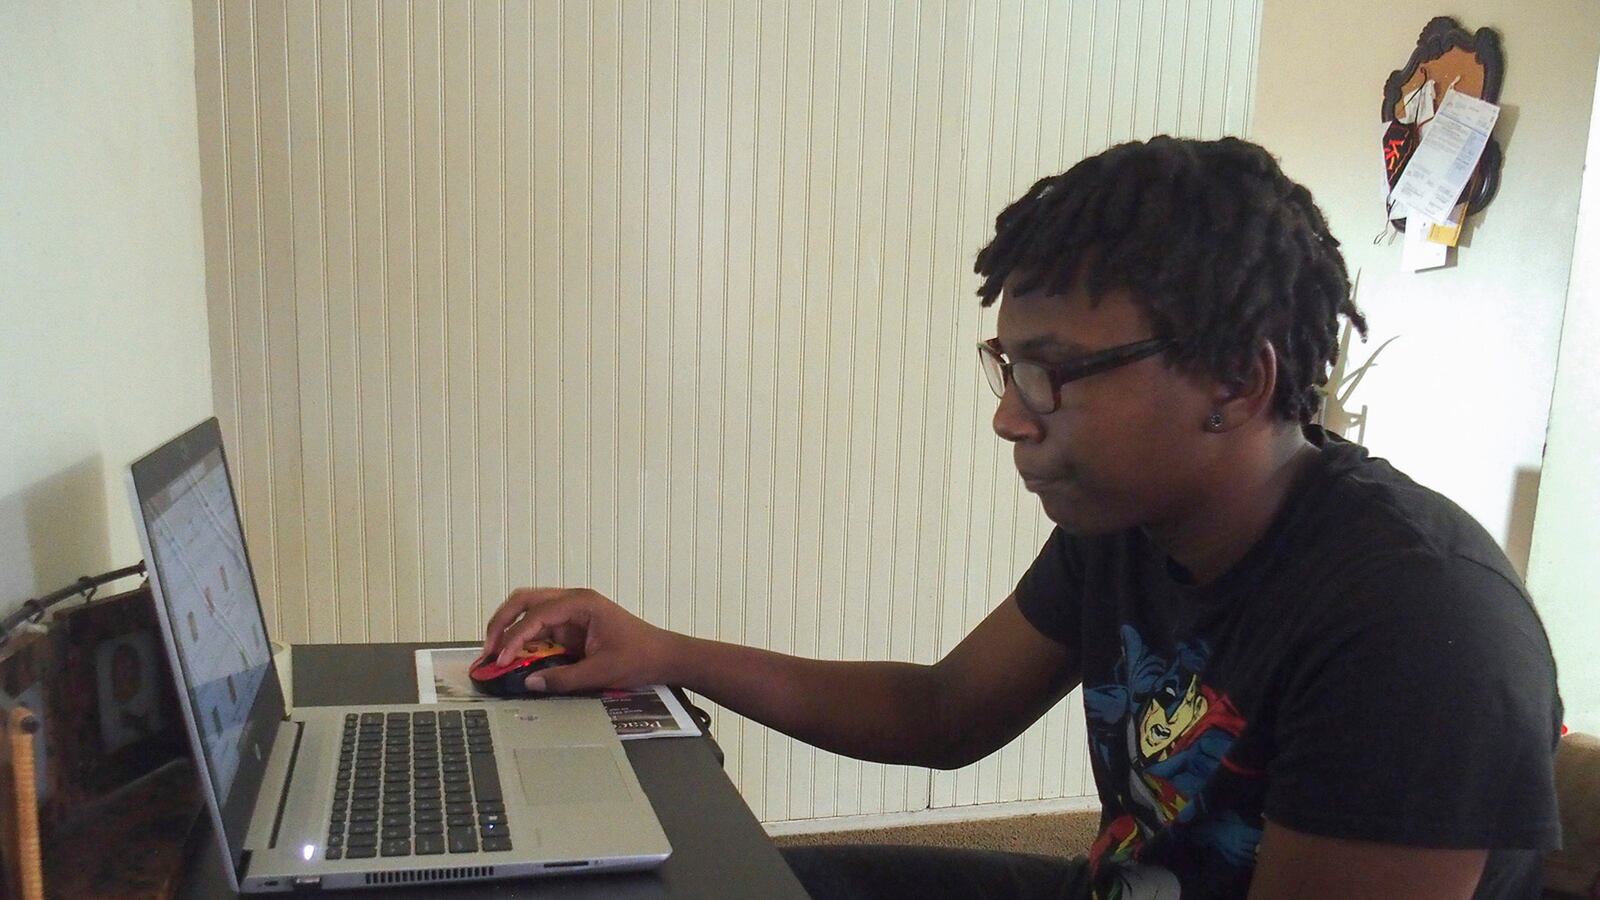 Jalan Clemmons working on his laptop computer at home.